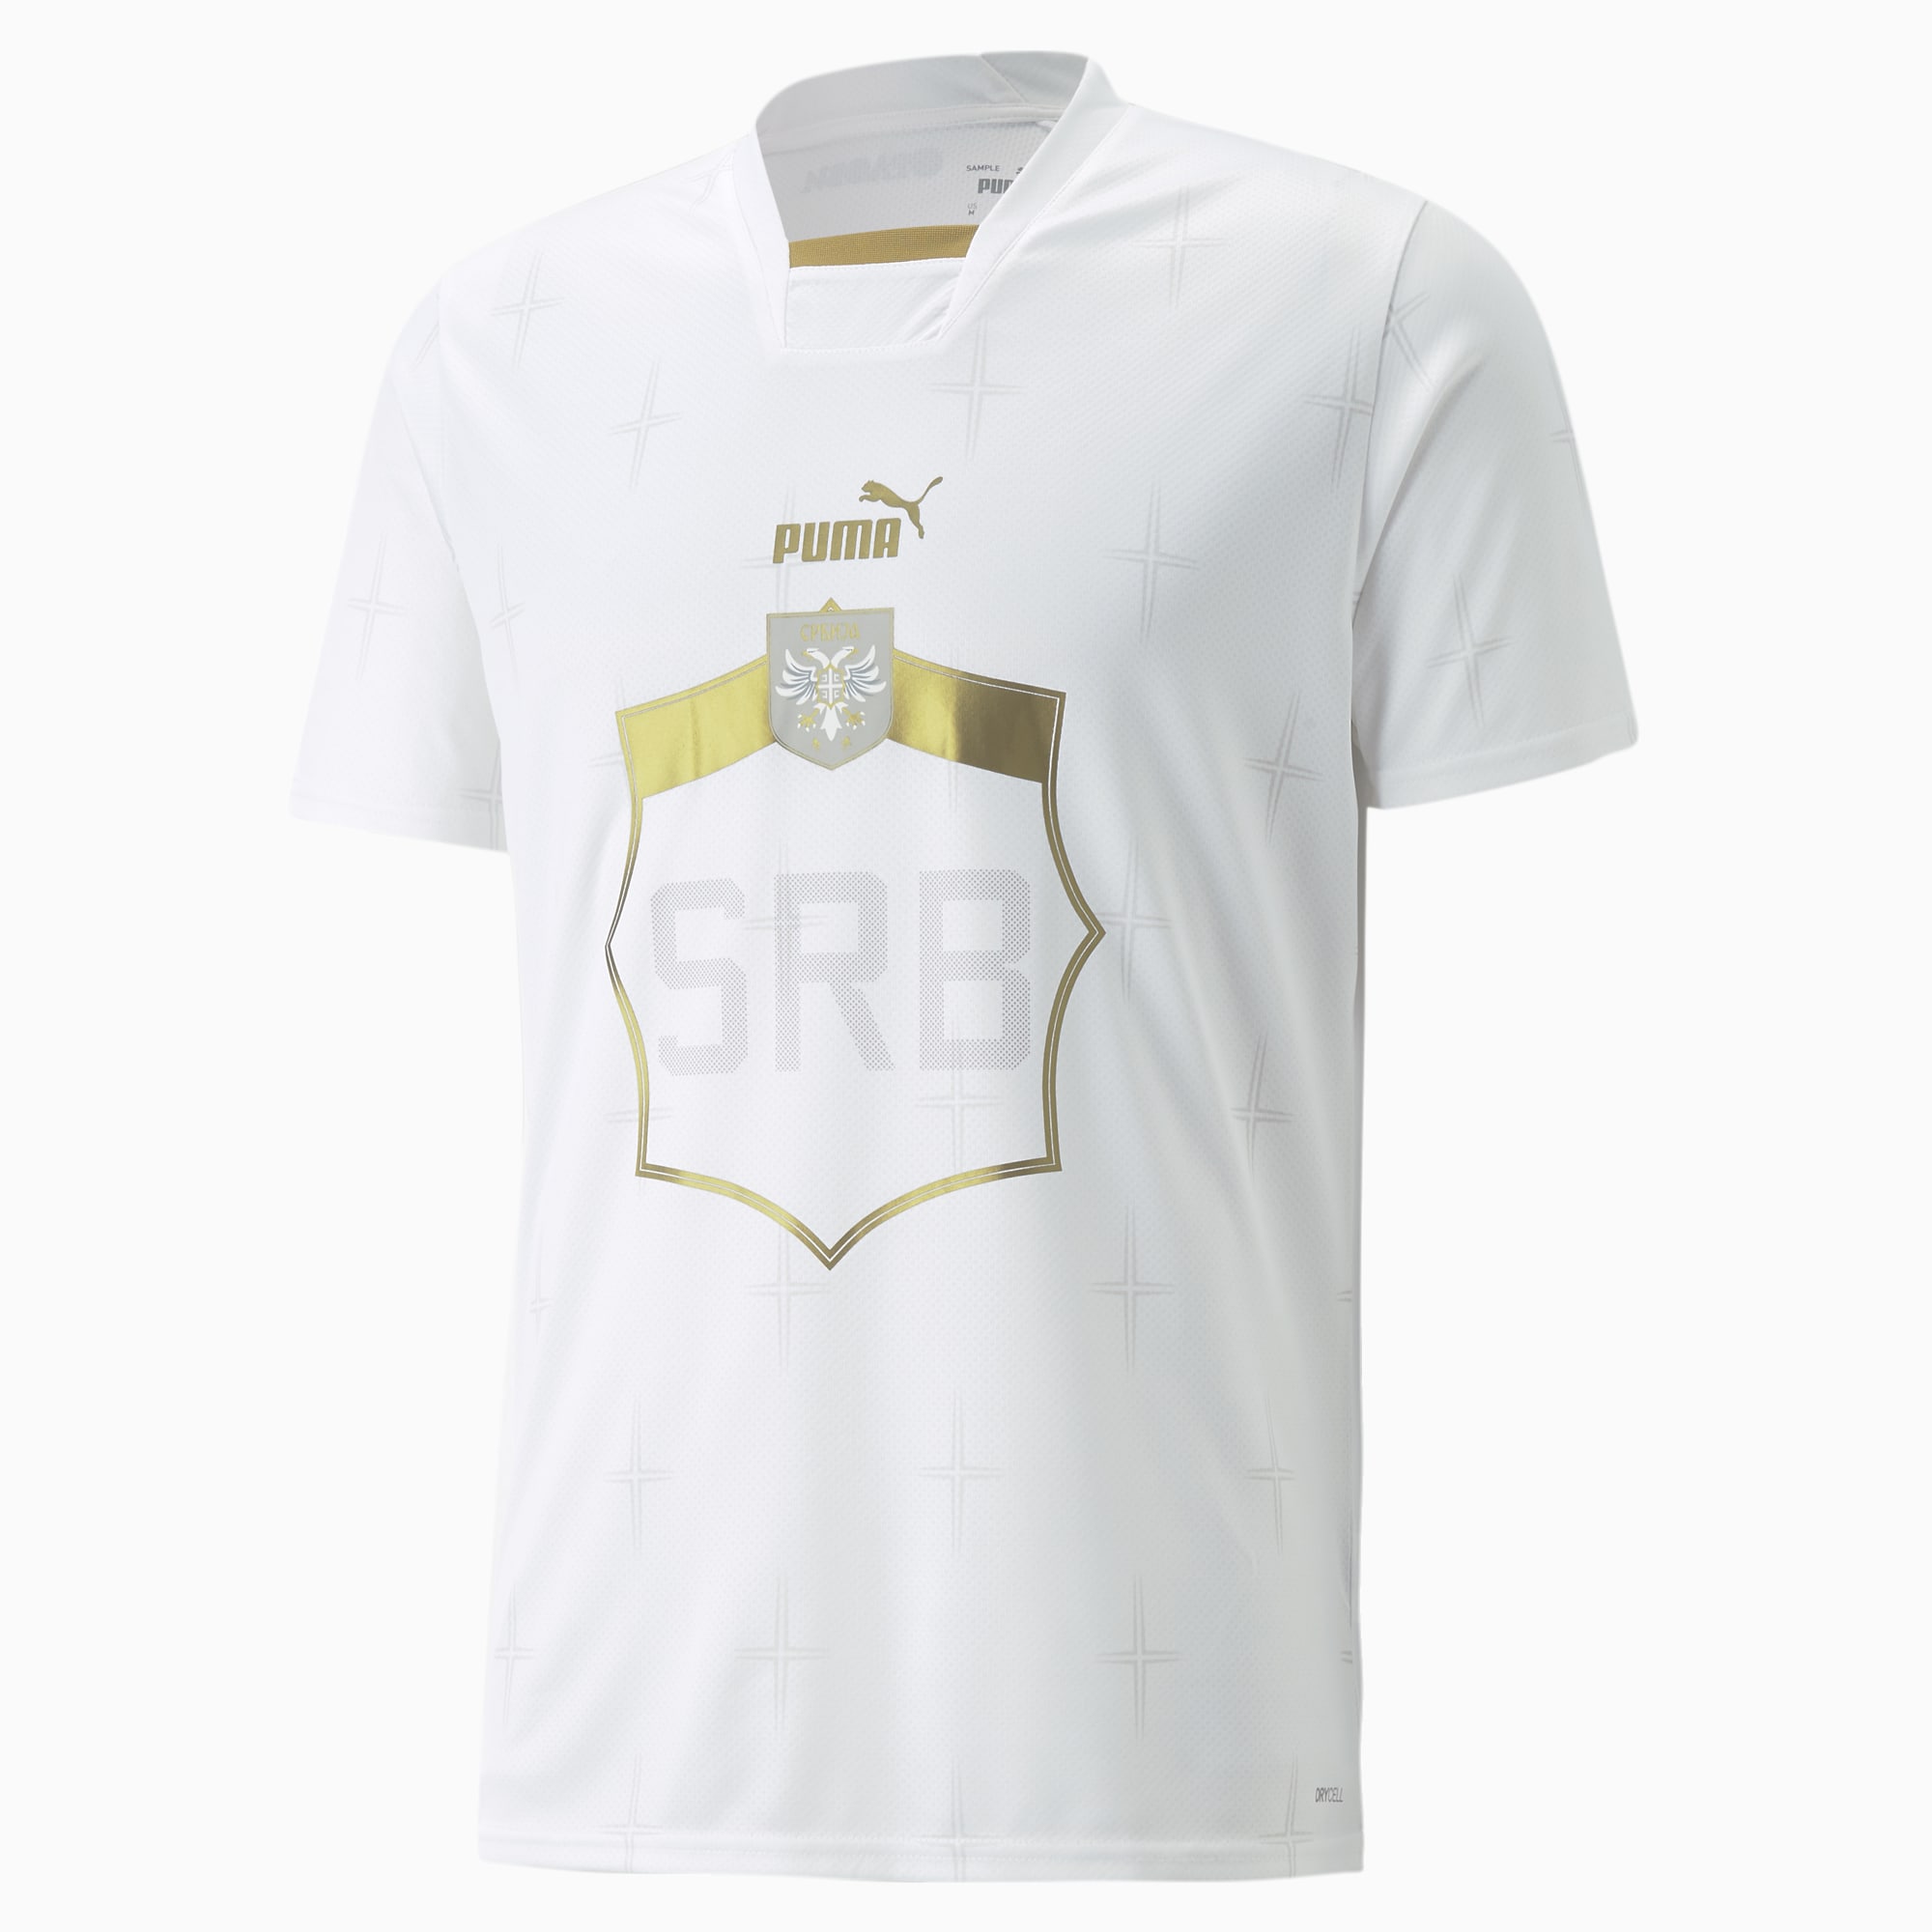 PUMA Maillot Away Serbie Pour Homme, Blanc/Or